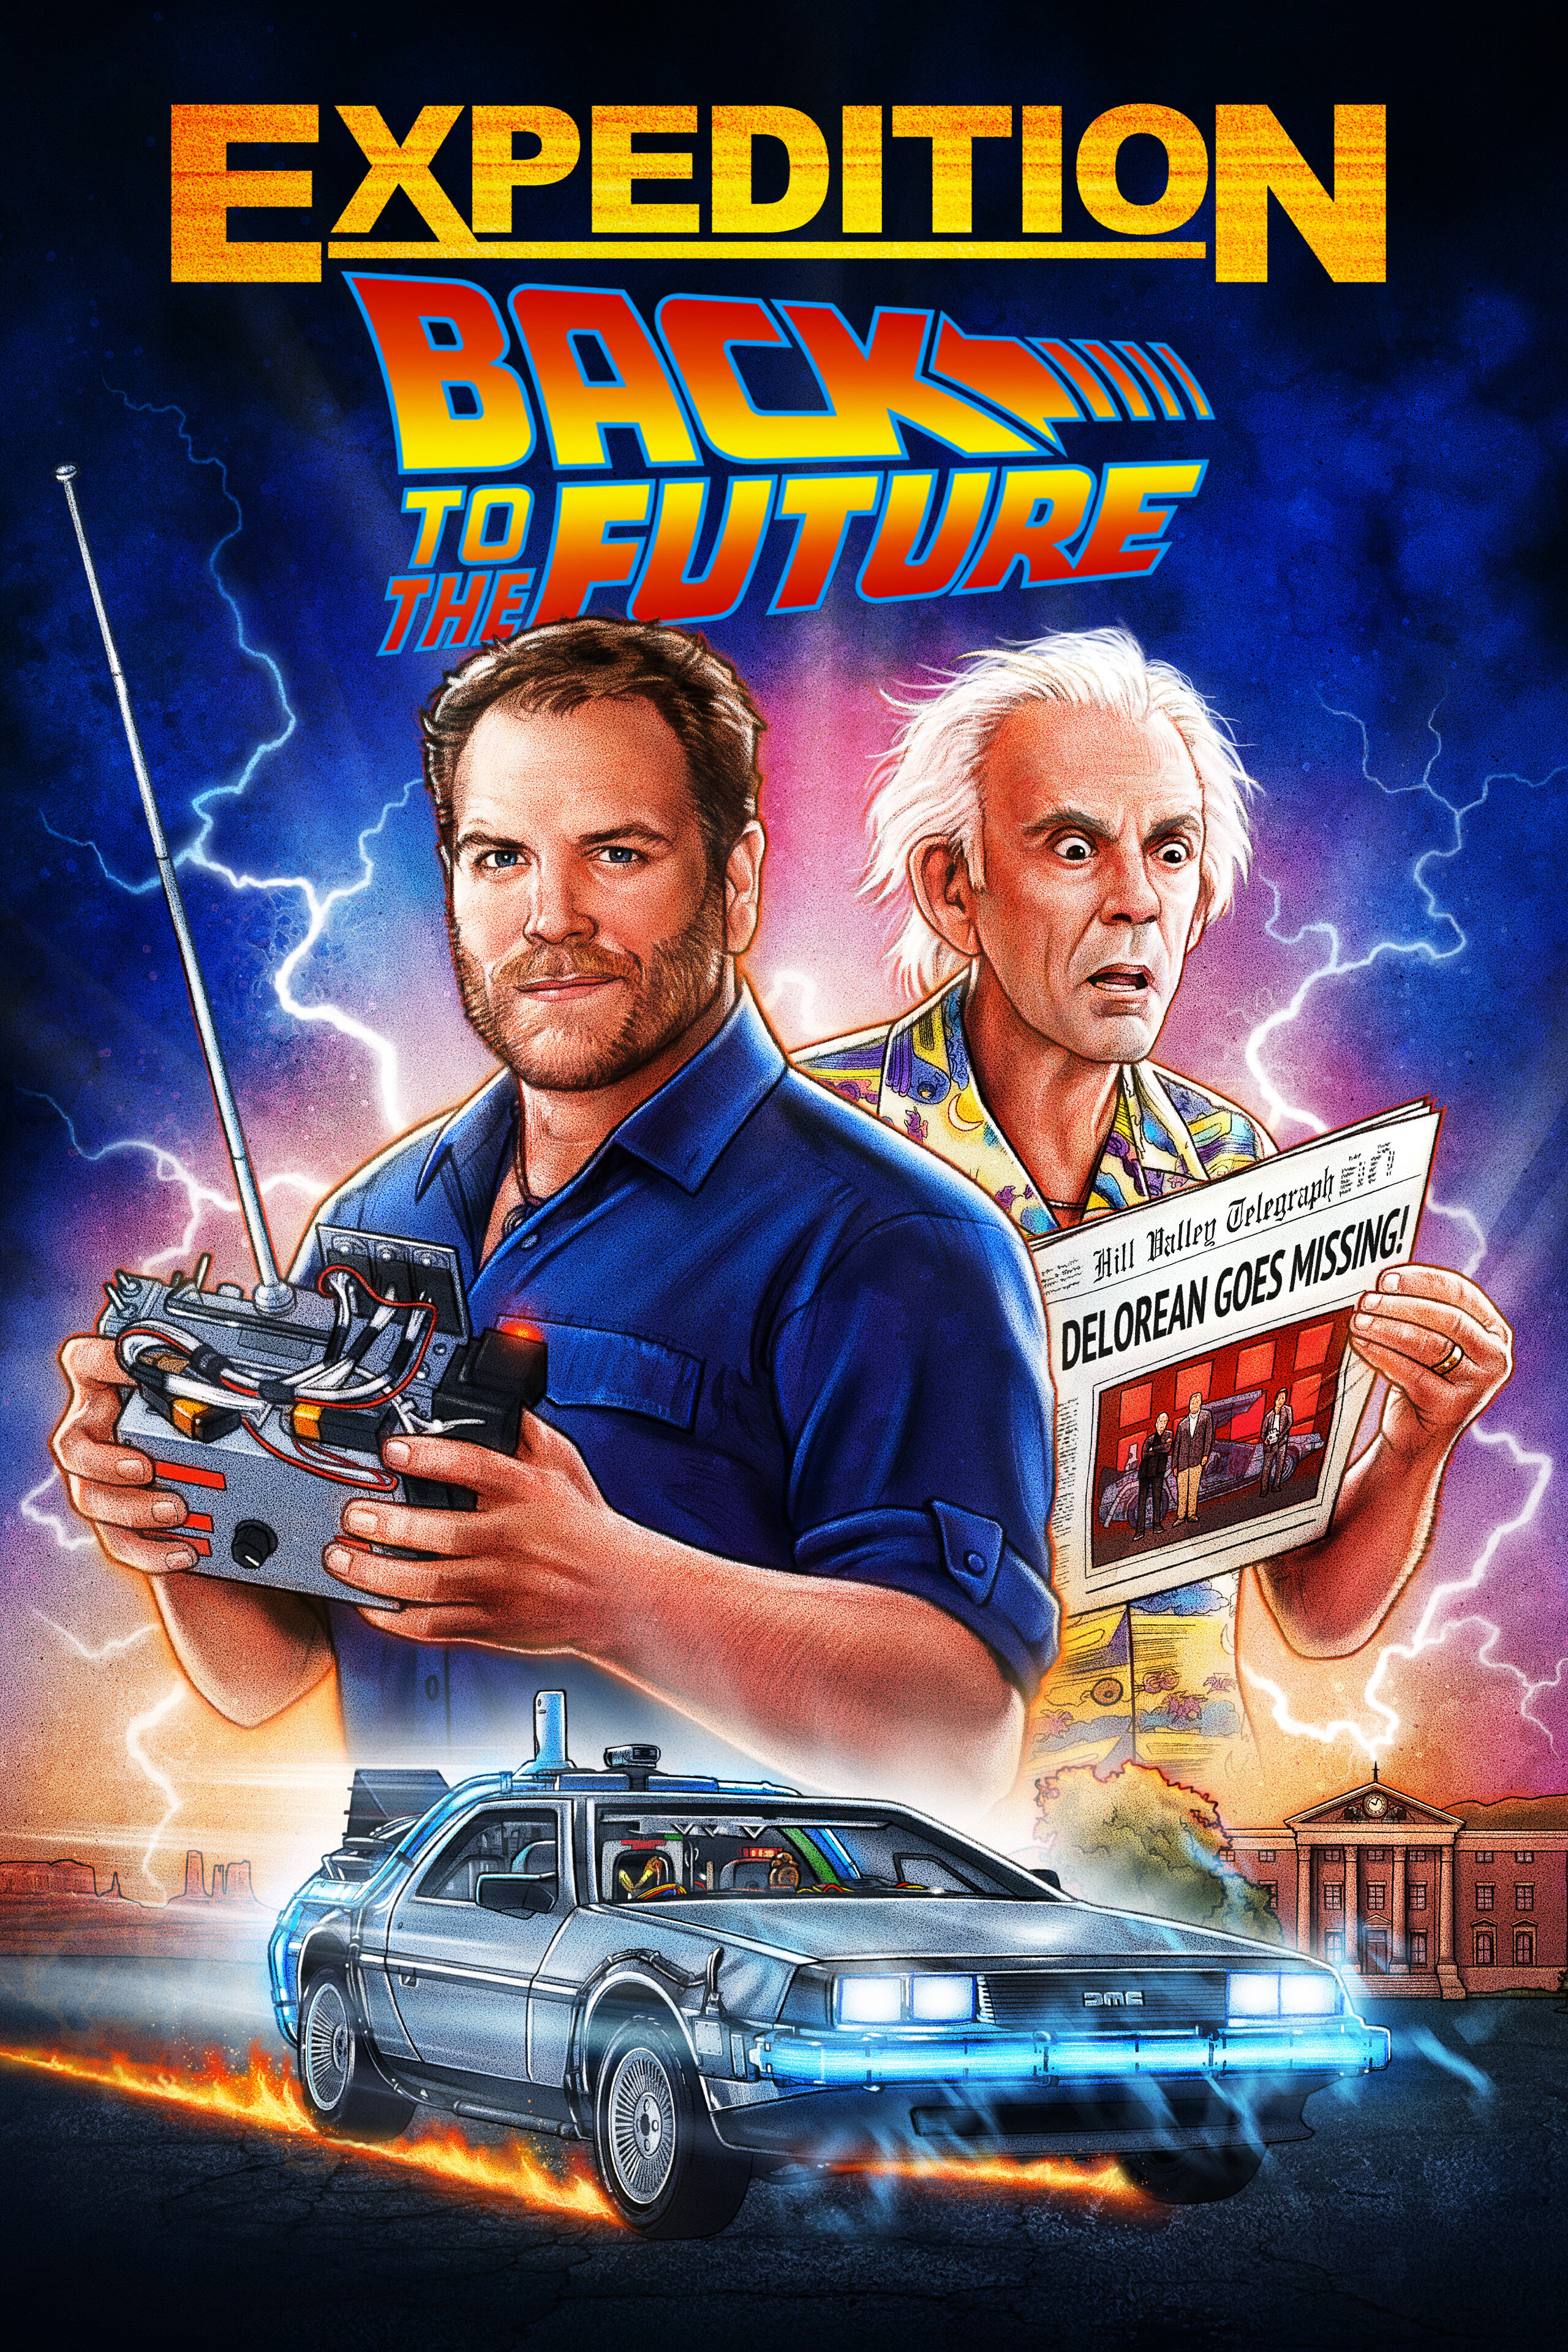 Expedition: Back to the Future ne zaman